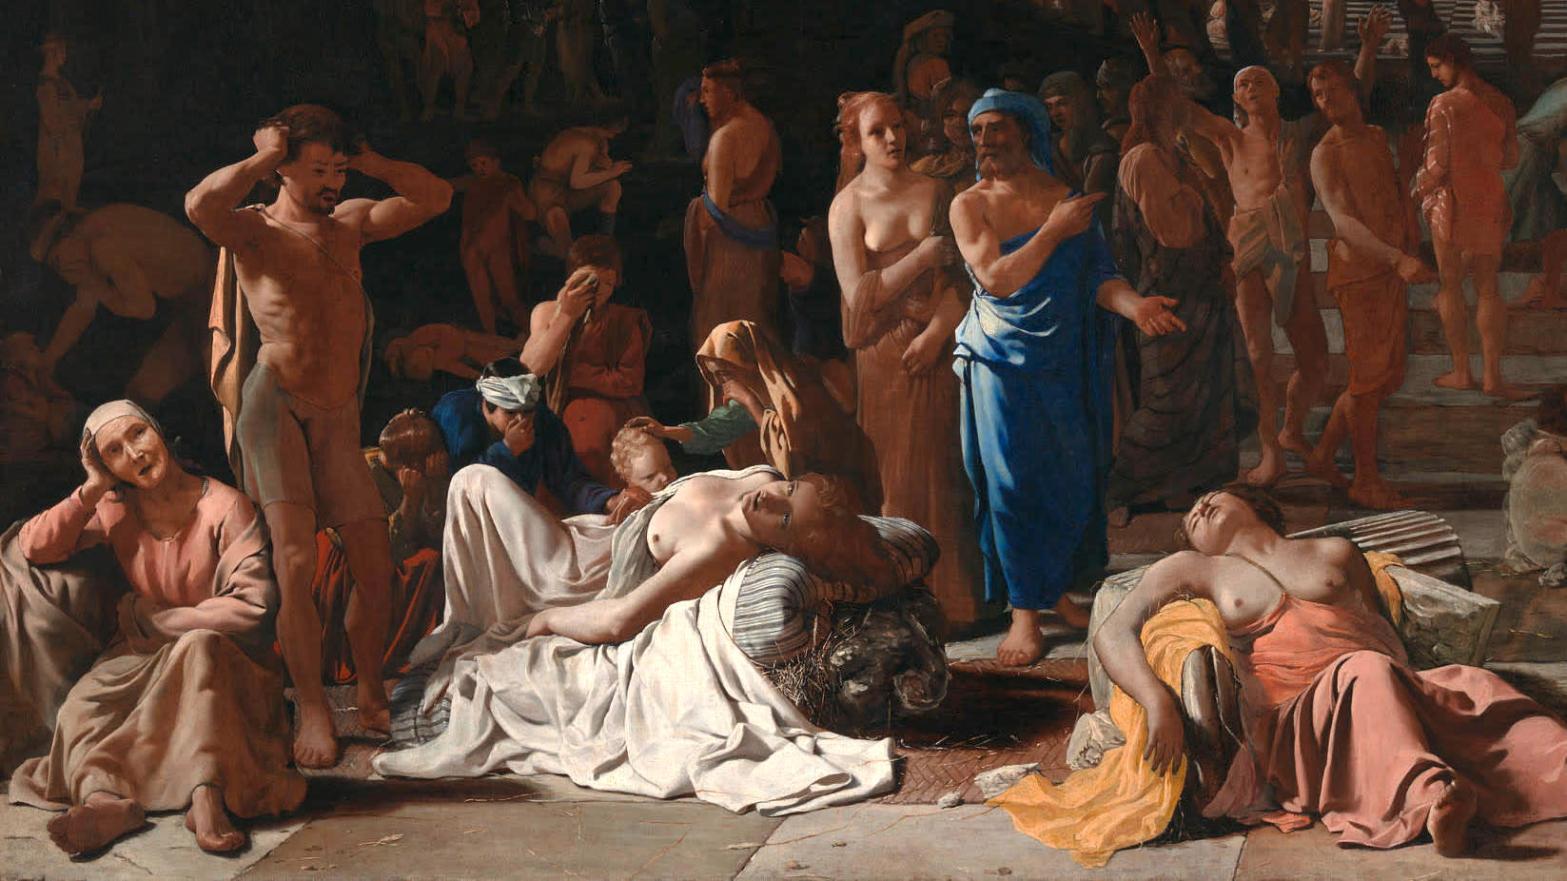 Plague in an Ancient City, circa 1652, by Michiel Sweerts, which is believed to reference the mysterious epidemic in Athens. (Image: Public Domain, Los Angeles County Museum of Art, Fair Use)